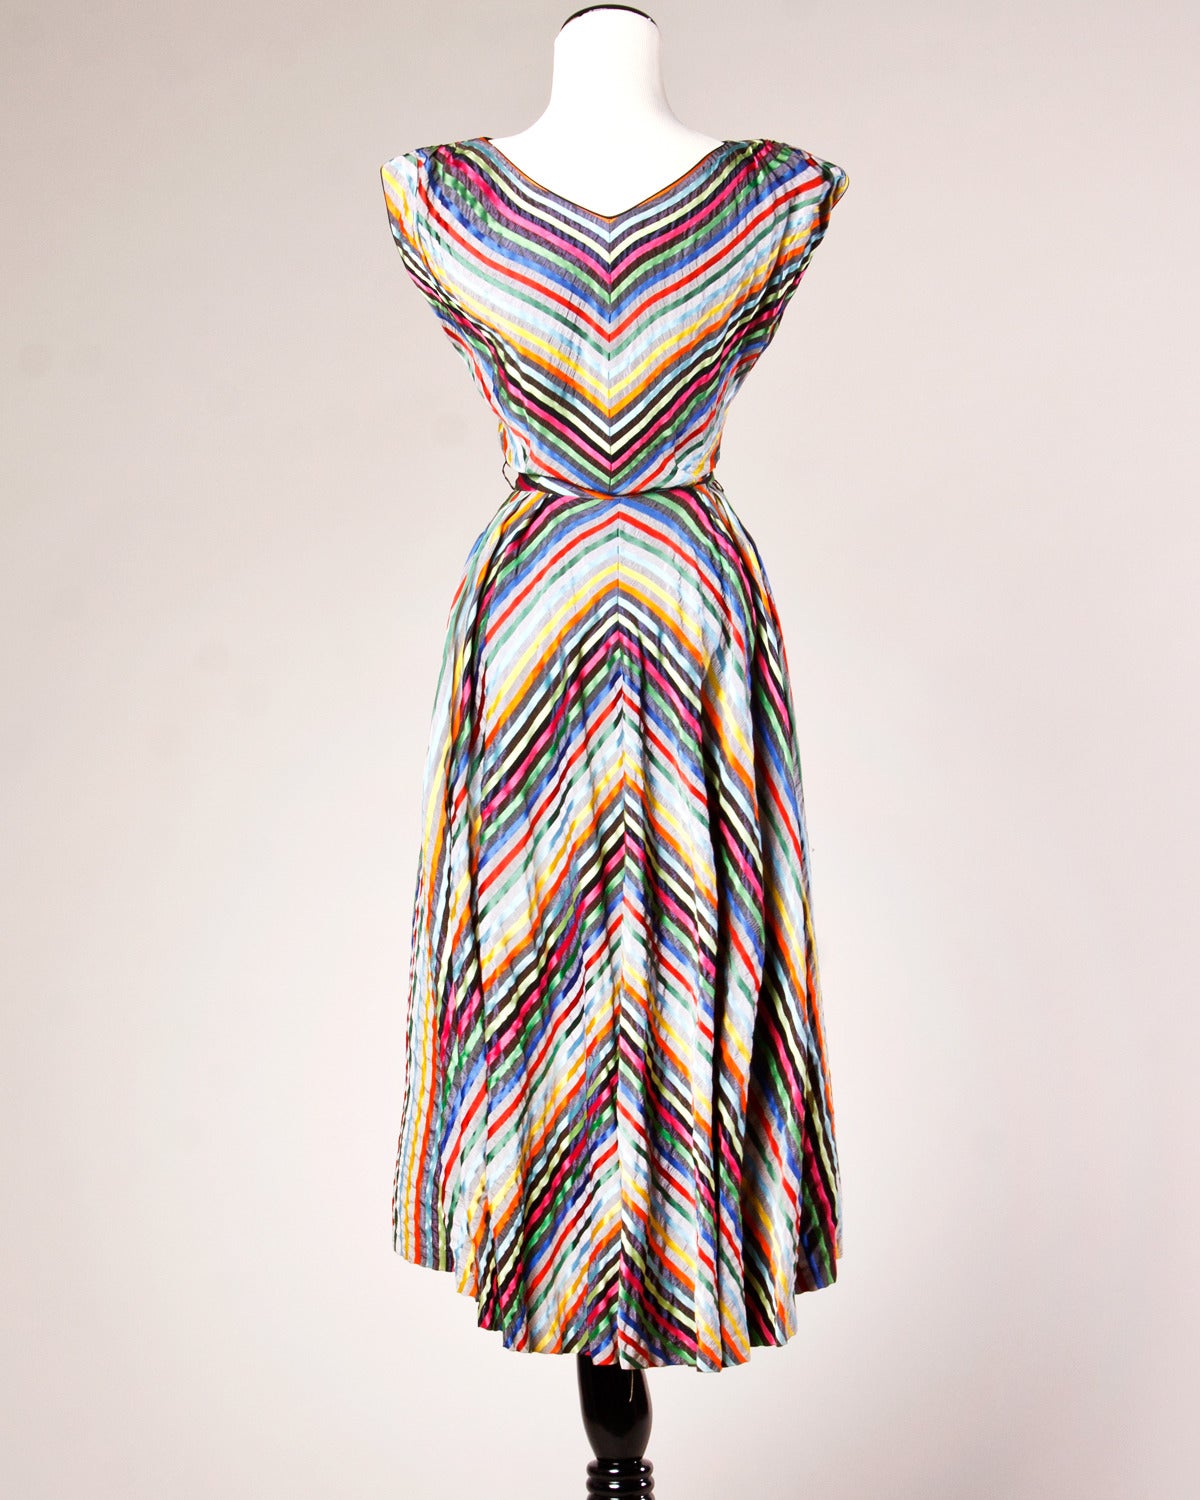 Women's Vintage 1940s Rainbow Striped Party Dress with a Full Sweep